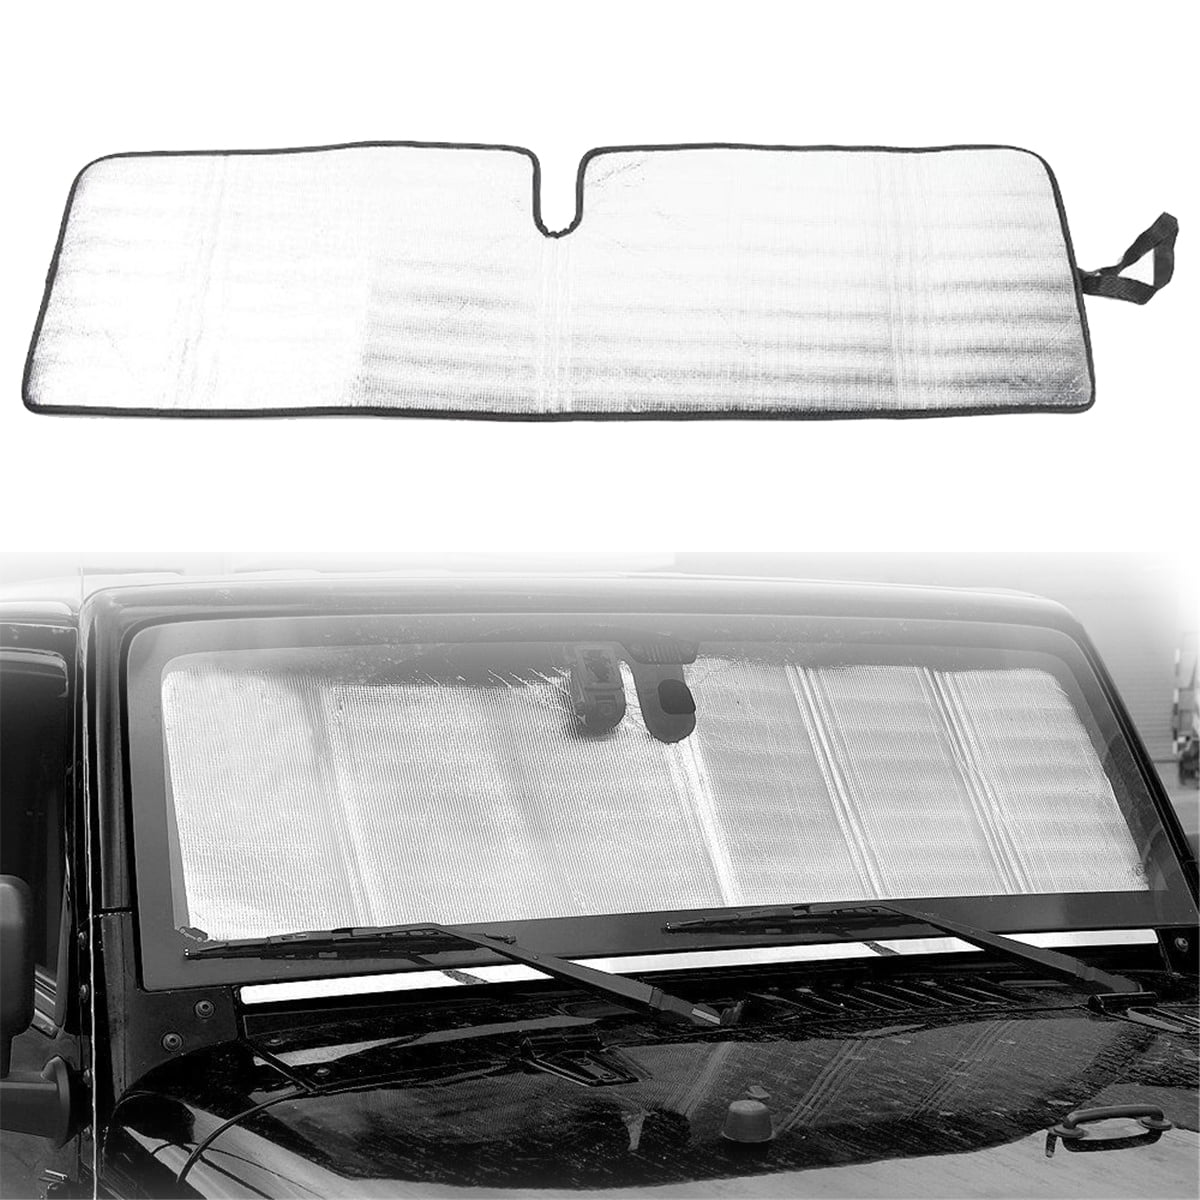 . Upgraded Graphic Reflective Protector Keep Vehicle Cool Block UV Rays Sun Visor Two Sizes Fit Most Vehicles Naruto Foldable Car Sunshades for Windshield 